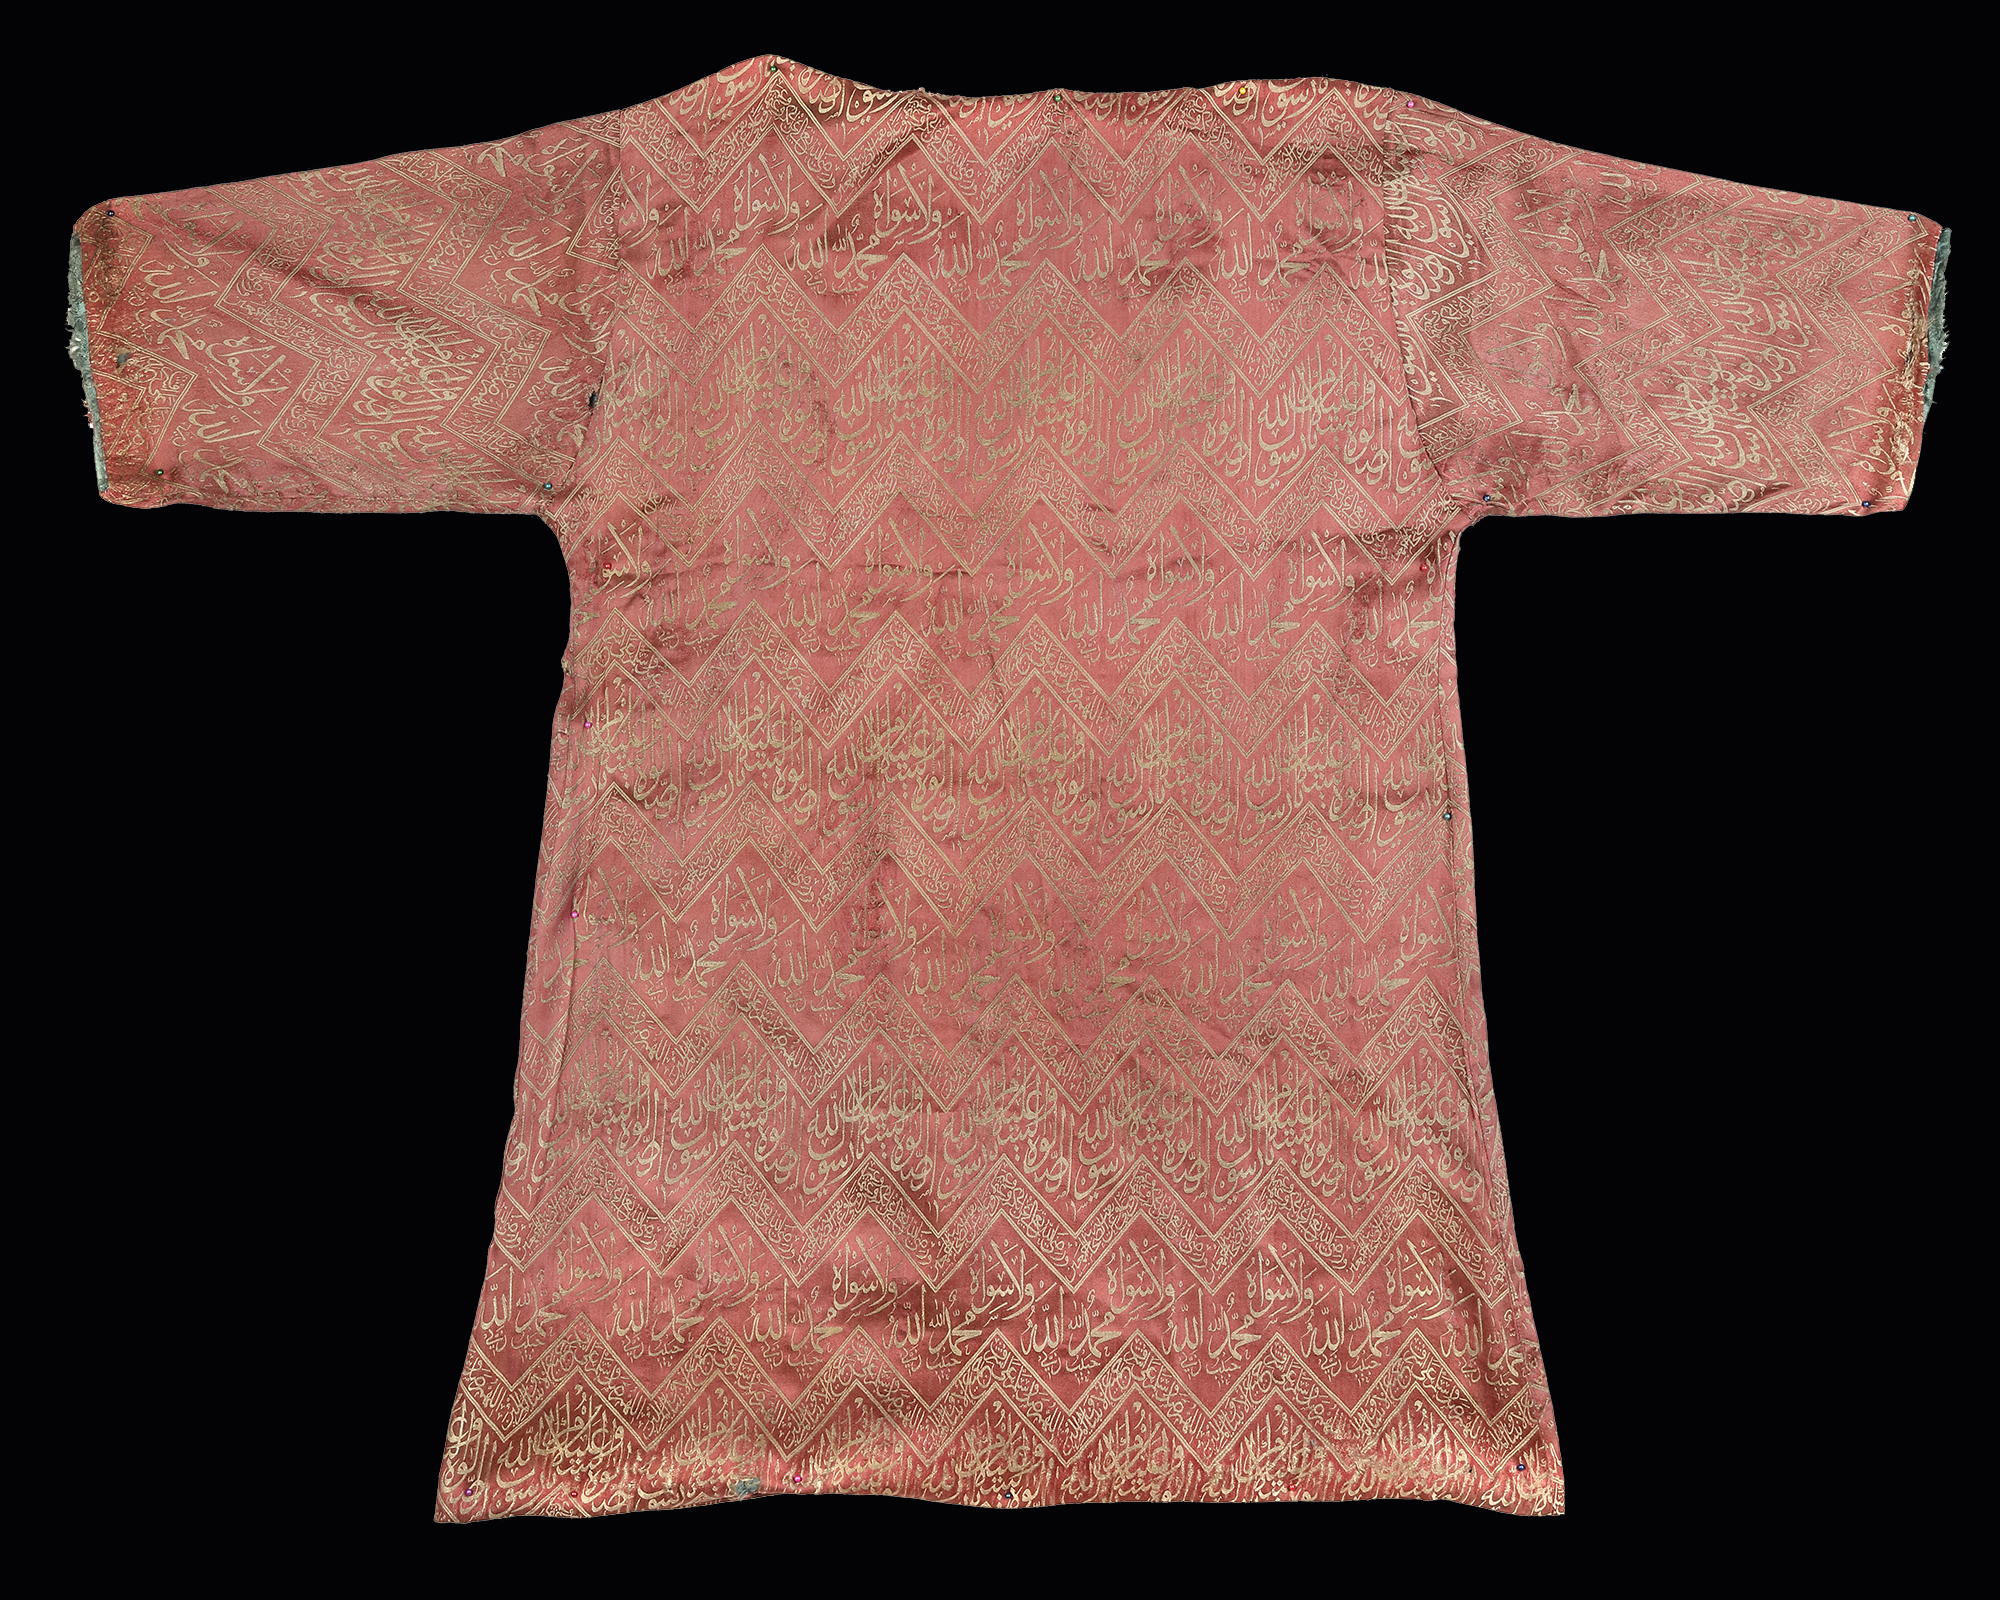 AN OTTOMAN LAMPAS-WEAVE TUNIC MADE FROM A CENOTAPH COVER, TURKEY, LATE 19TH CENTURY - Image 4 of 4